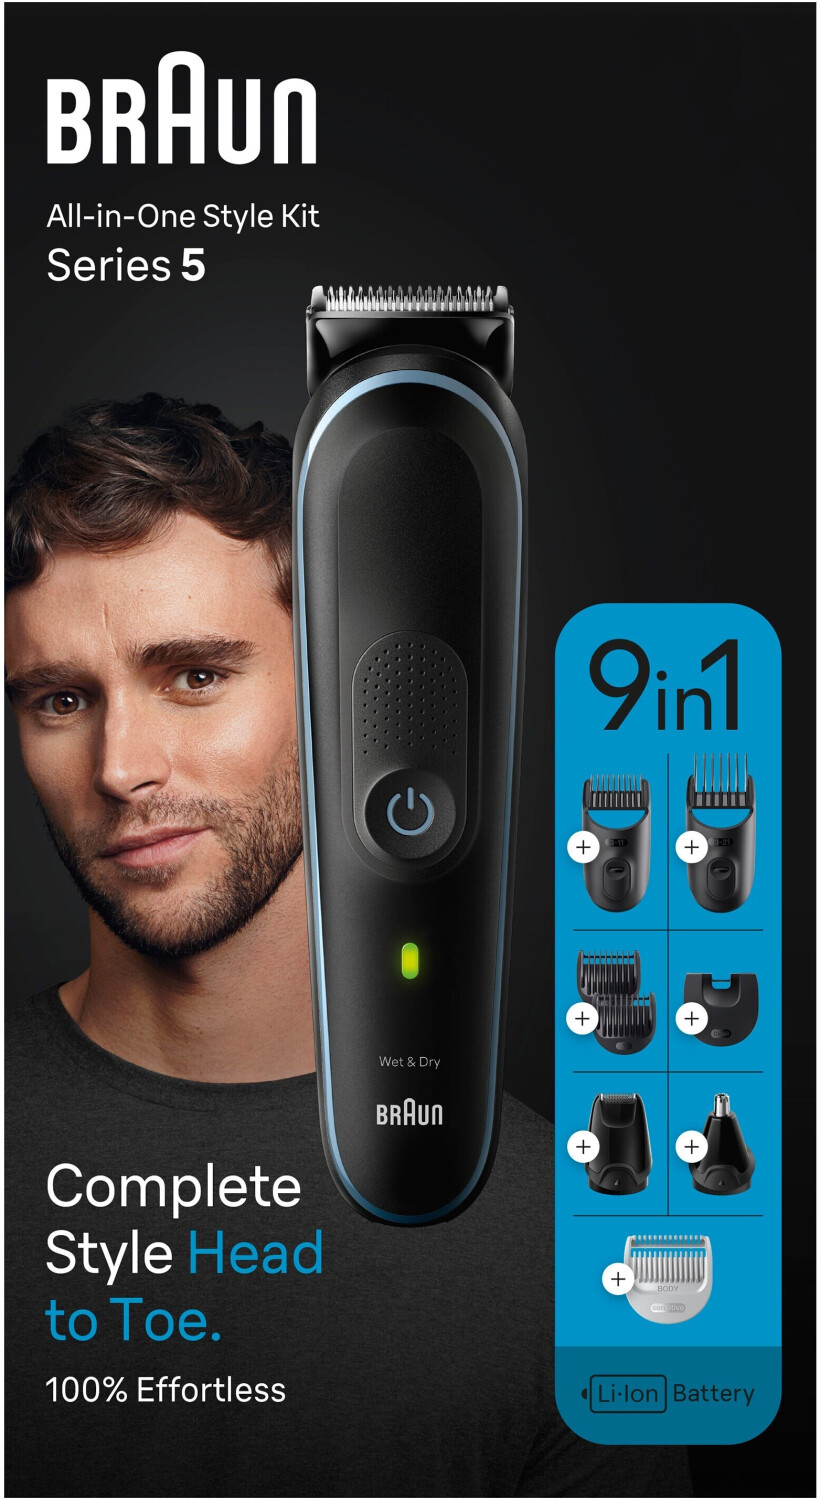 Braun All-in-One Style Kit Series 5 MGK5411 ab 42,96 €